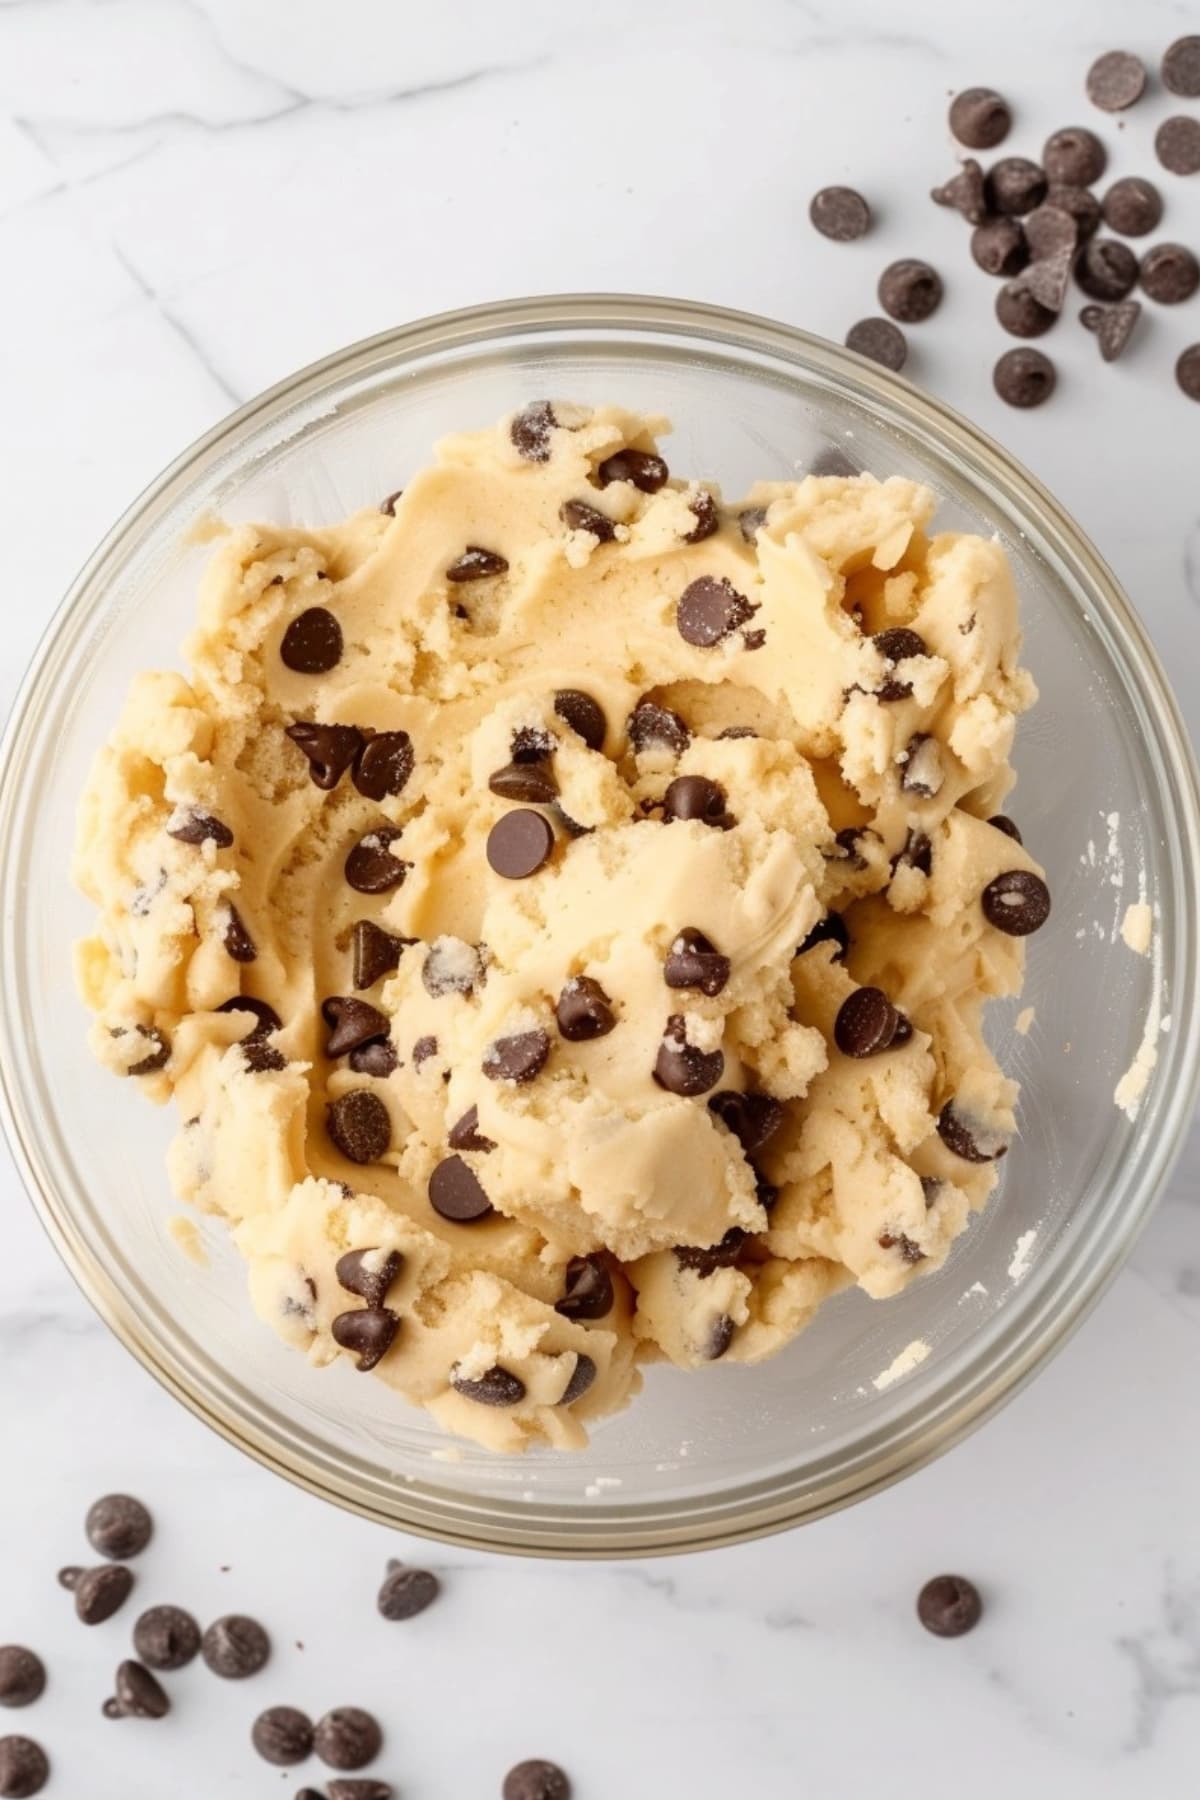 Edible cookie dough with chocolate chips in a glass bowl.